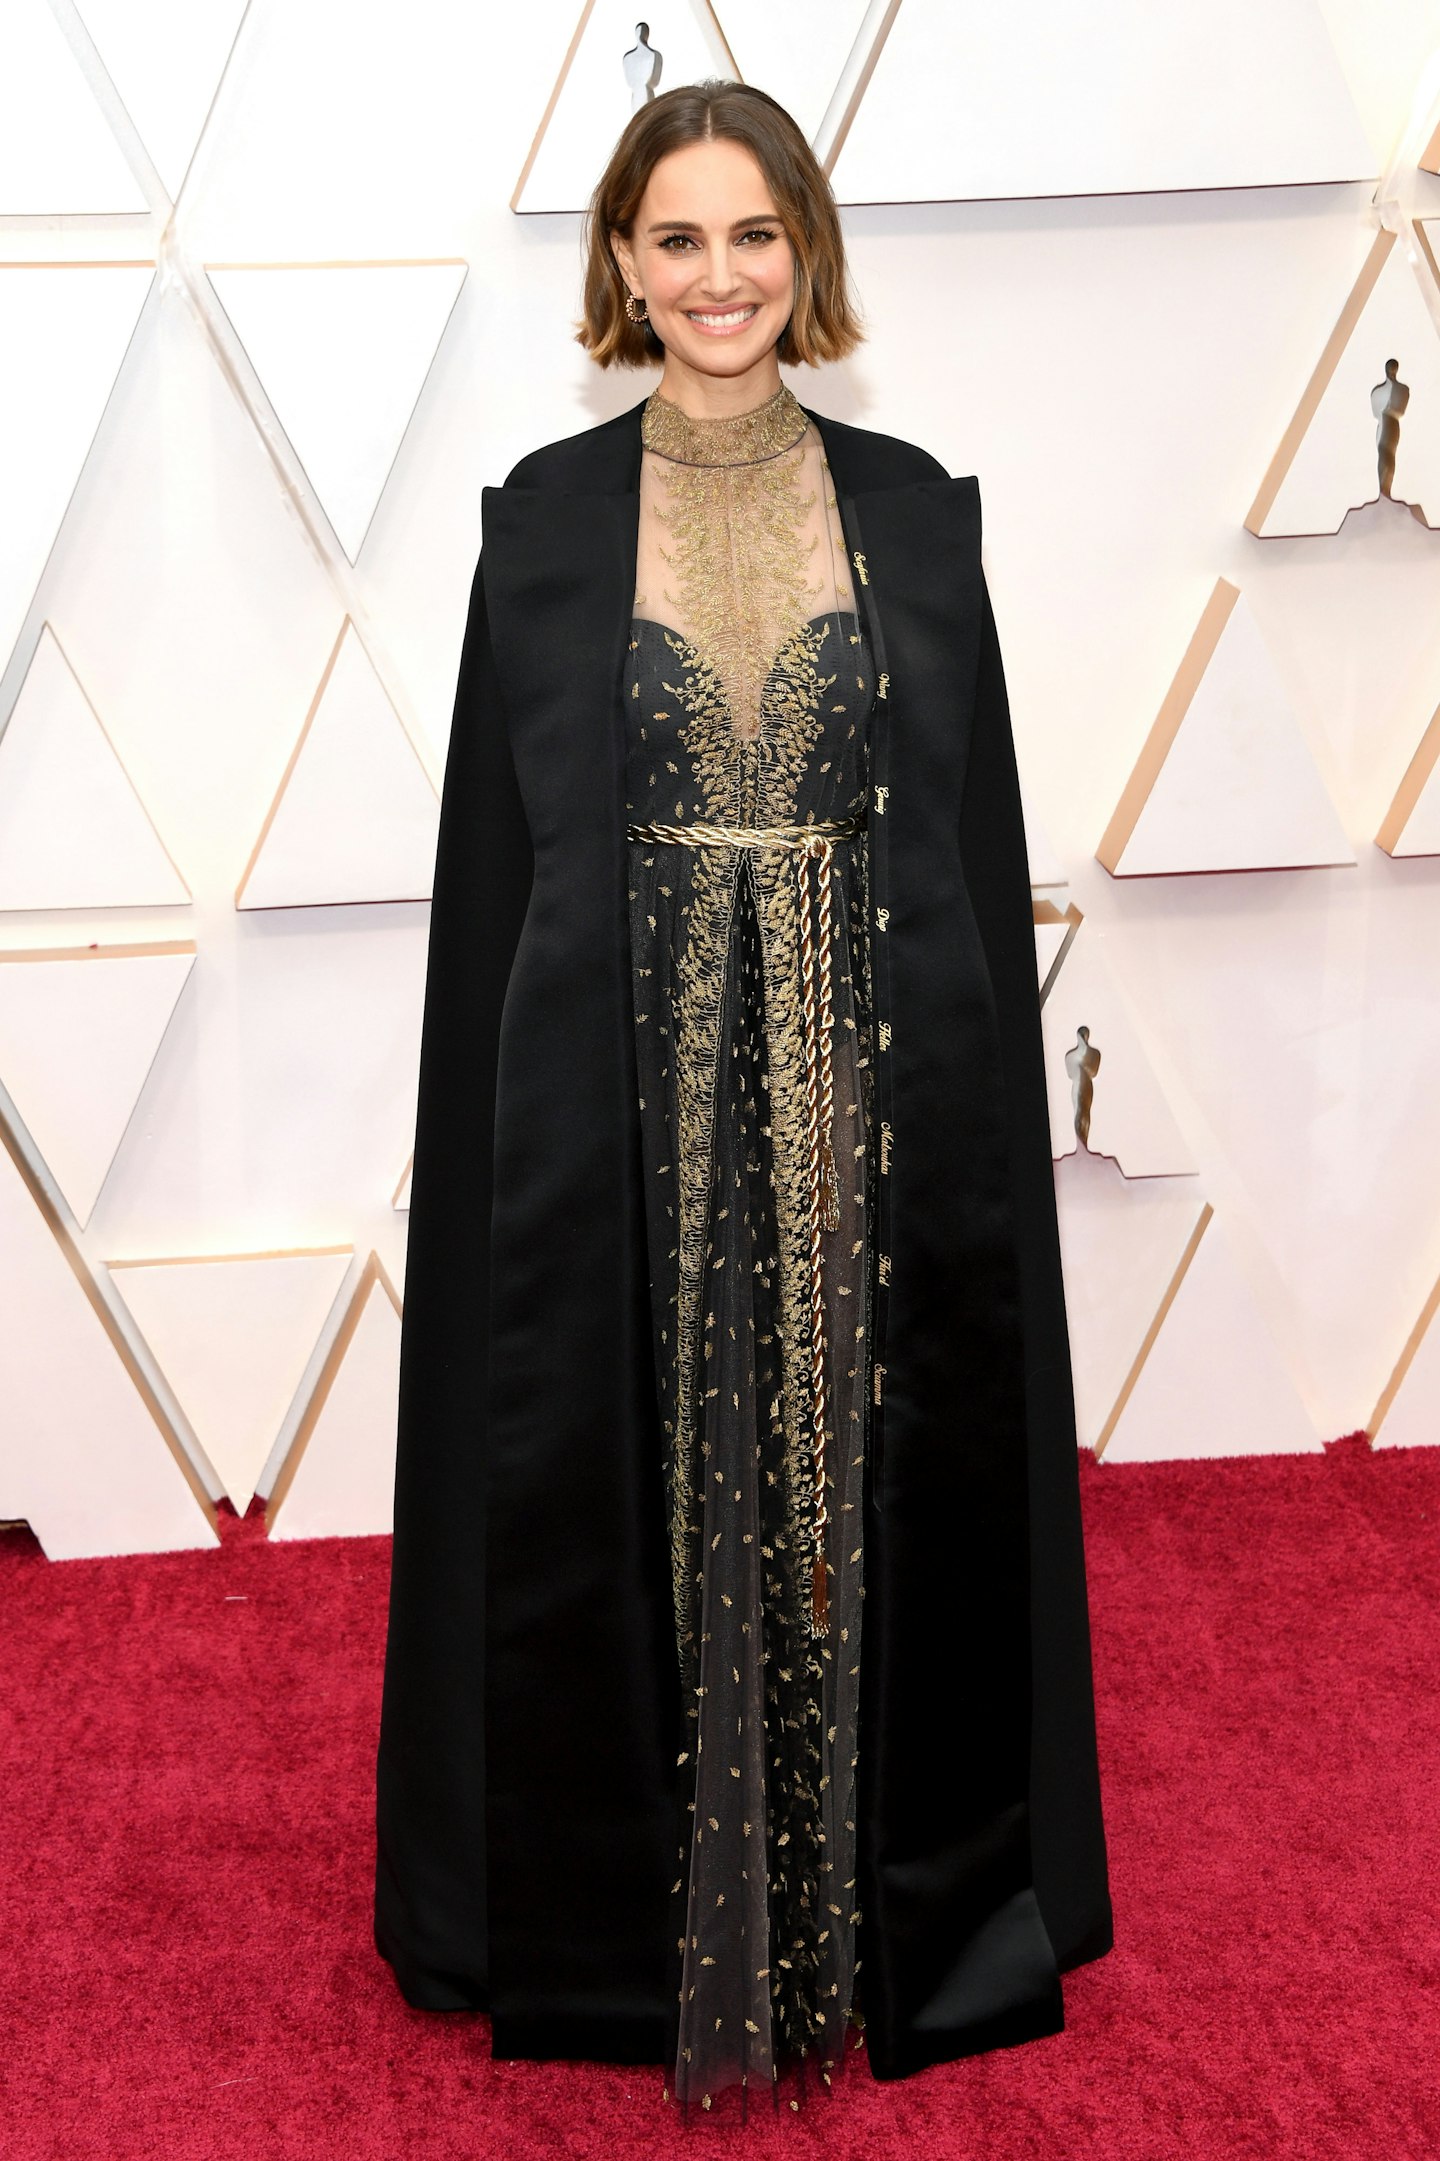 Natalie Portman wore a Dior look with a cape embroidered with the names of all the women who were snubbed by the Academy this year